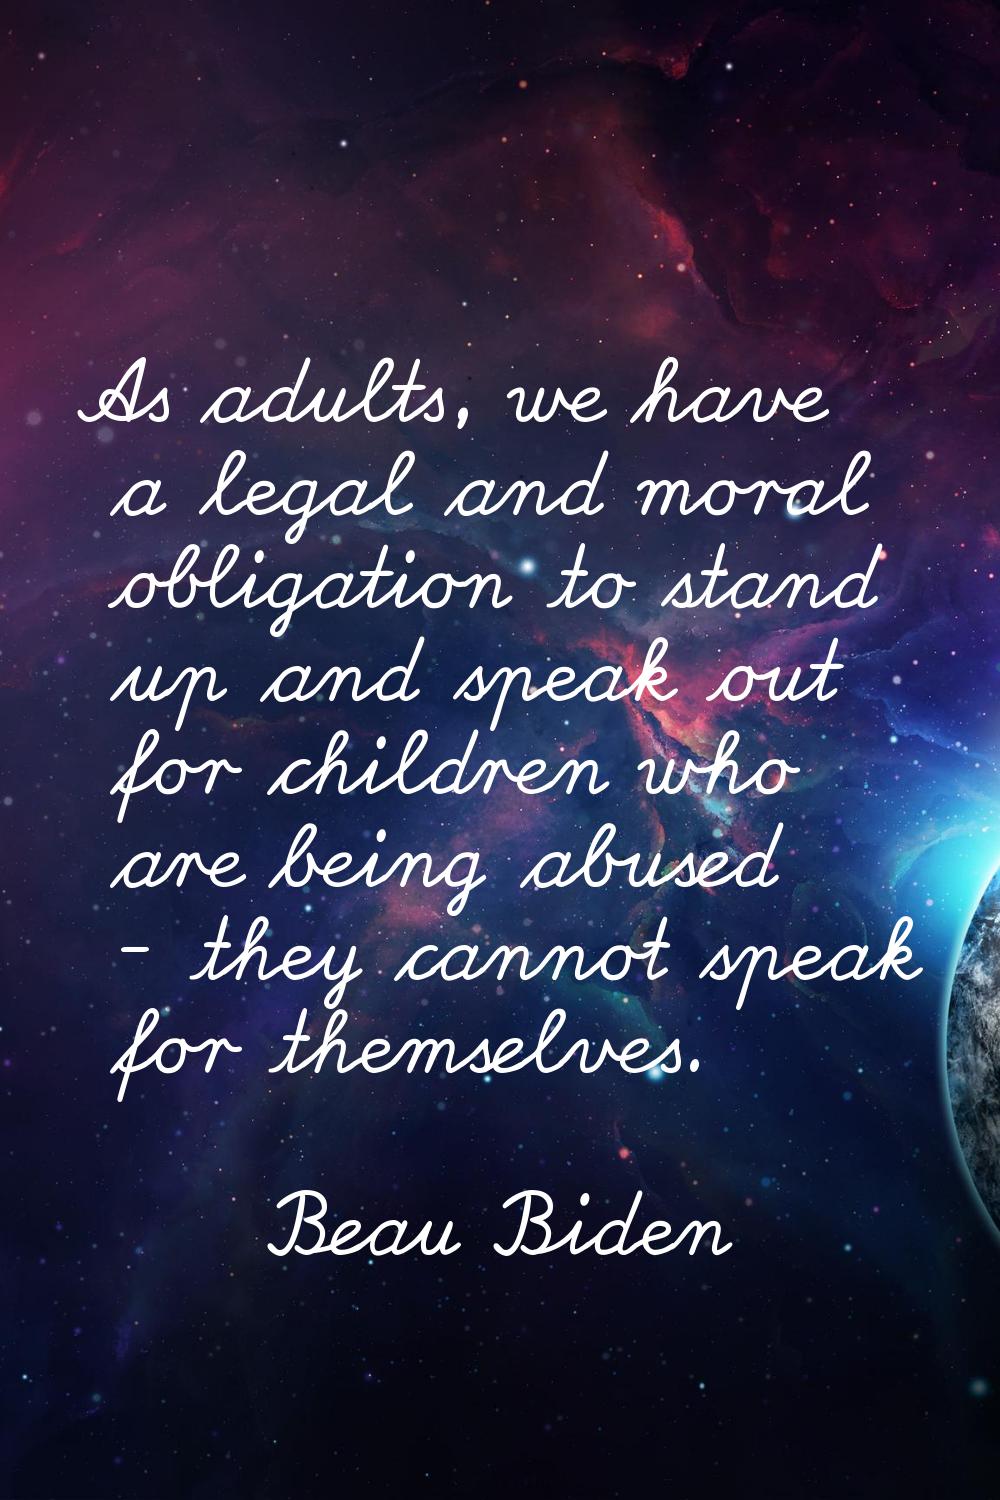 As adults, we have a legal and moral obligation to stand up and speak out for children who are bein